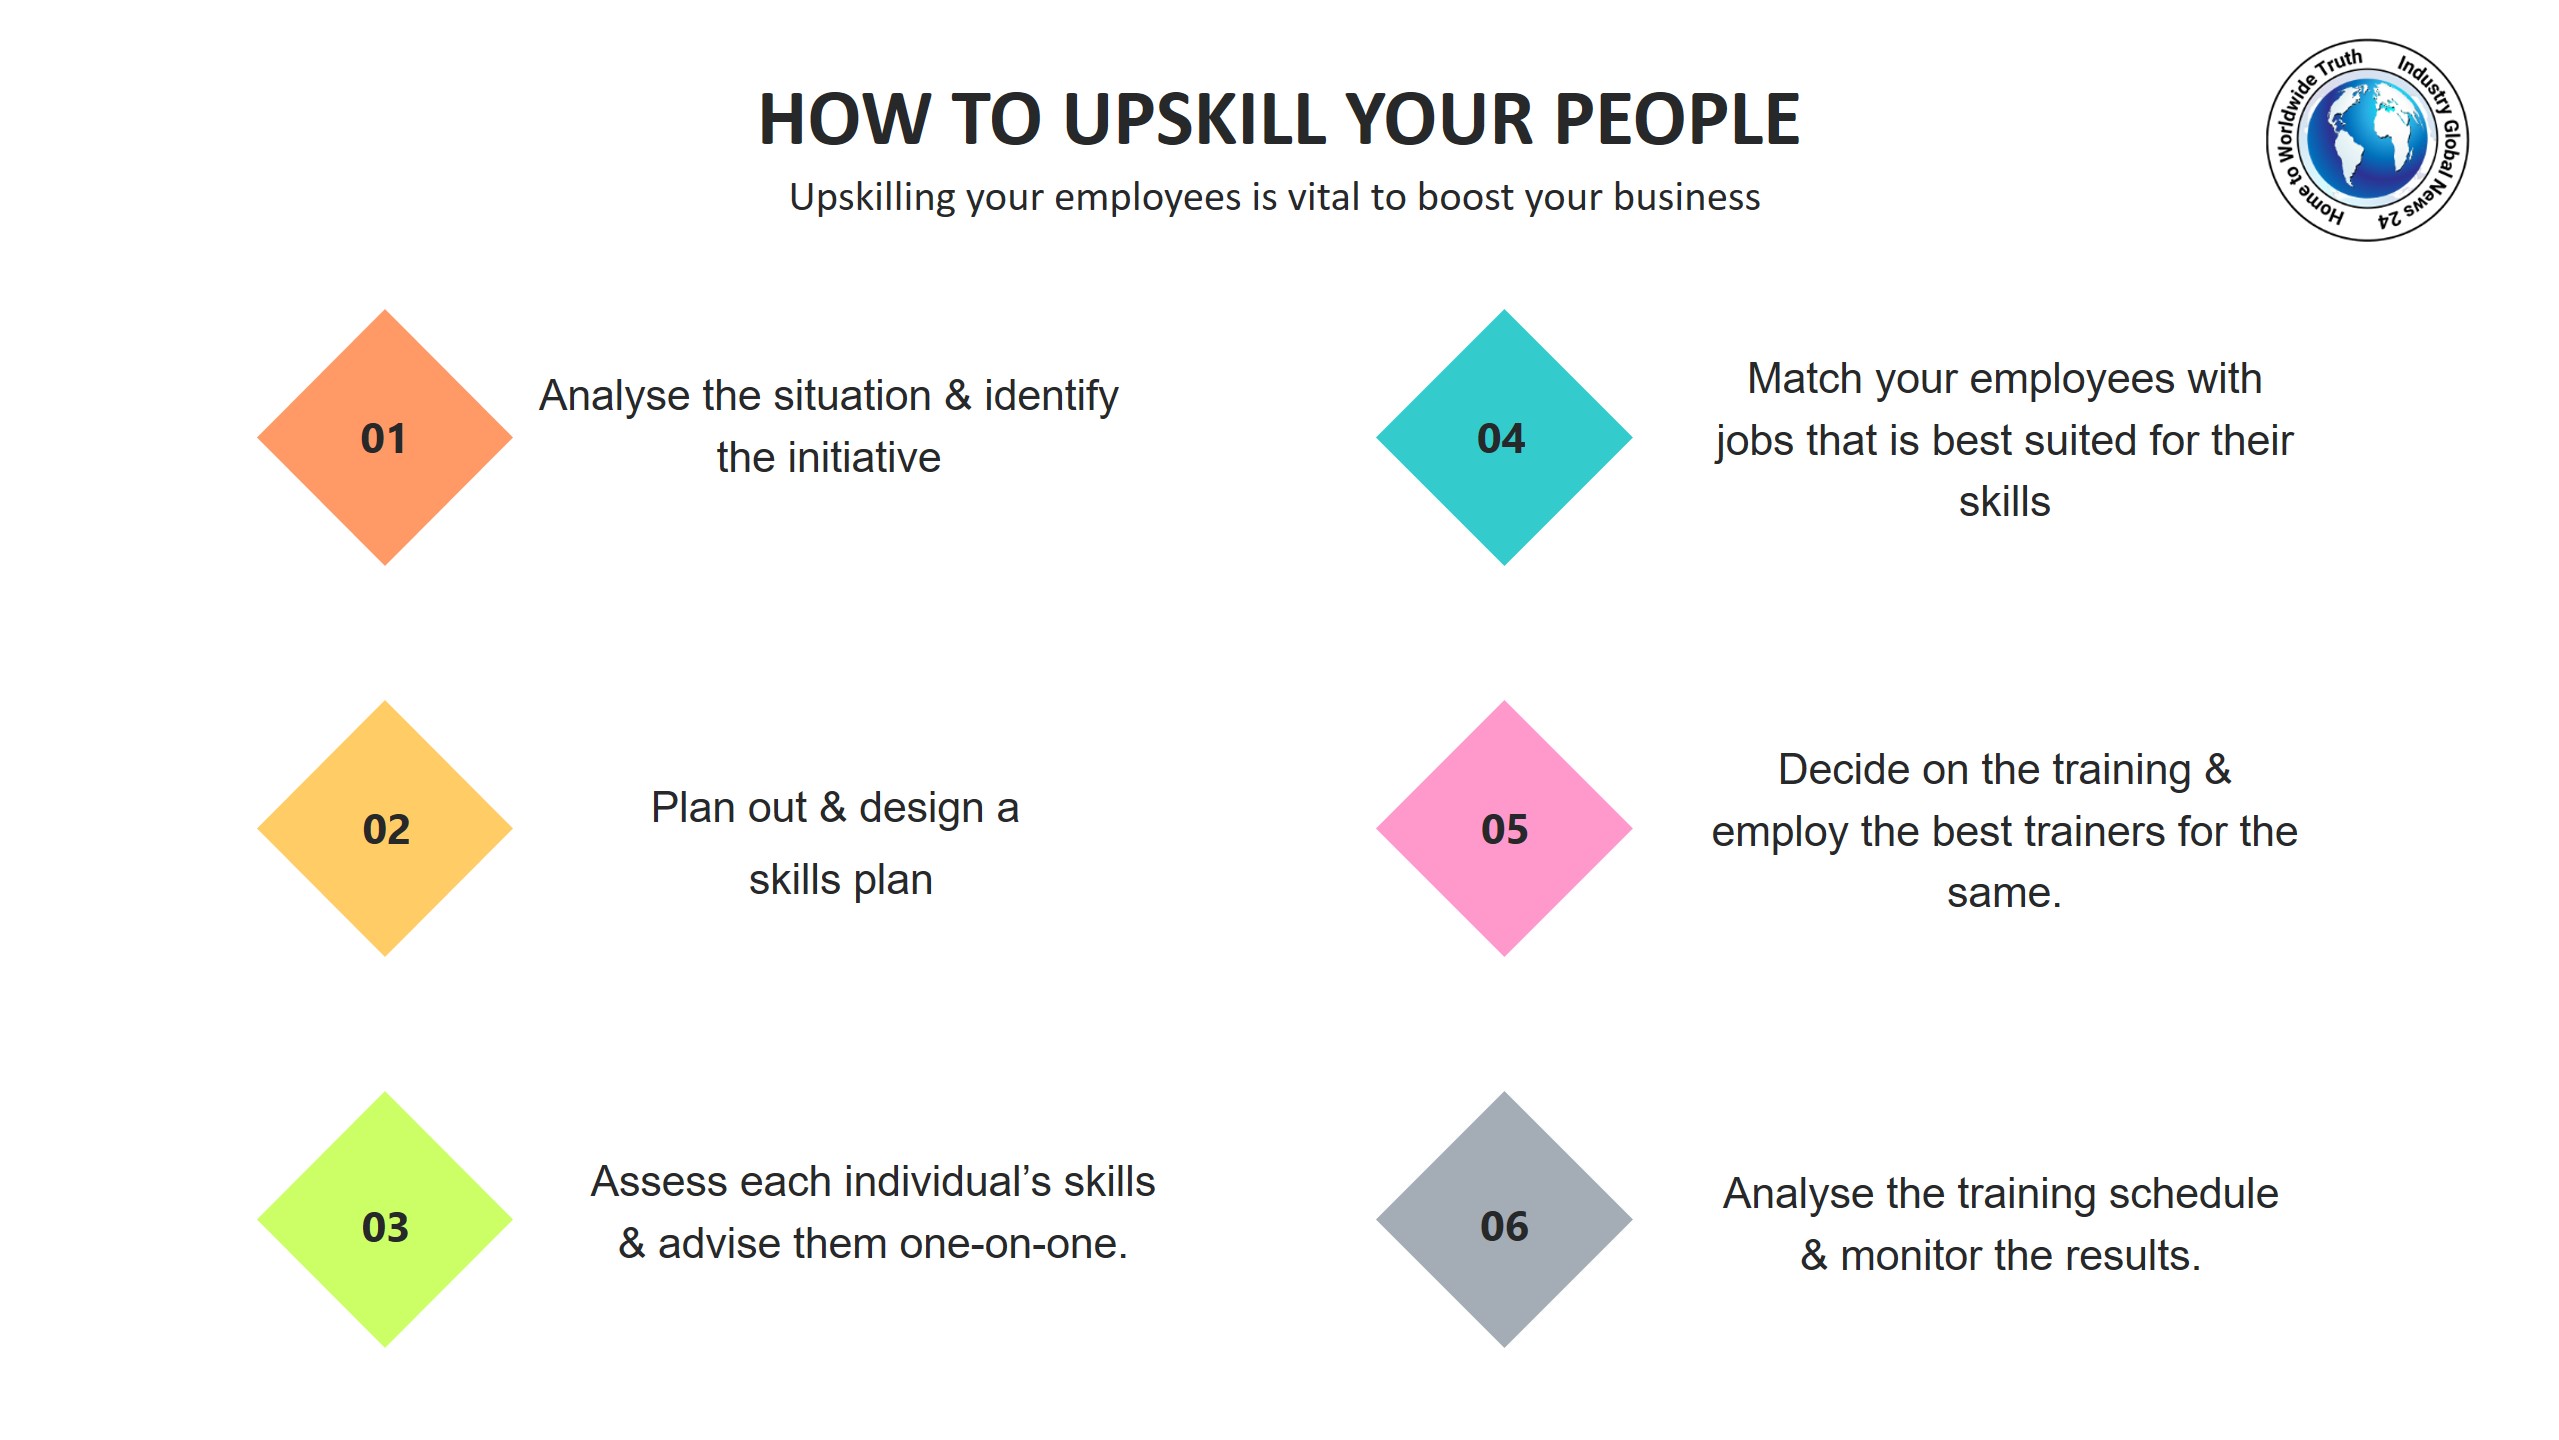 How to upskill your people